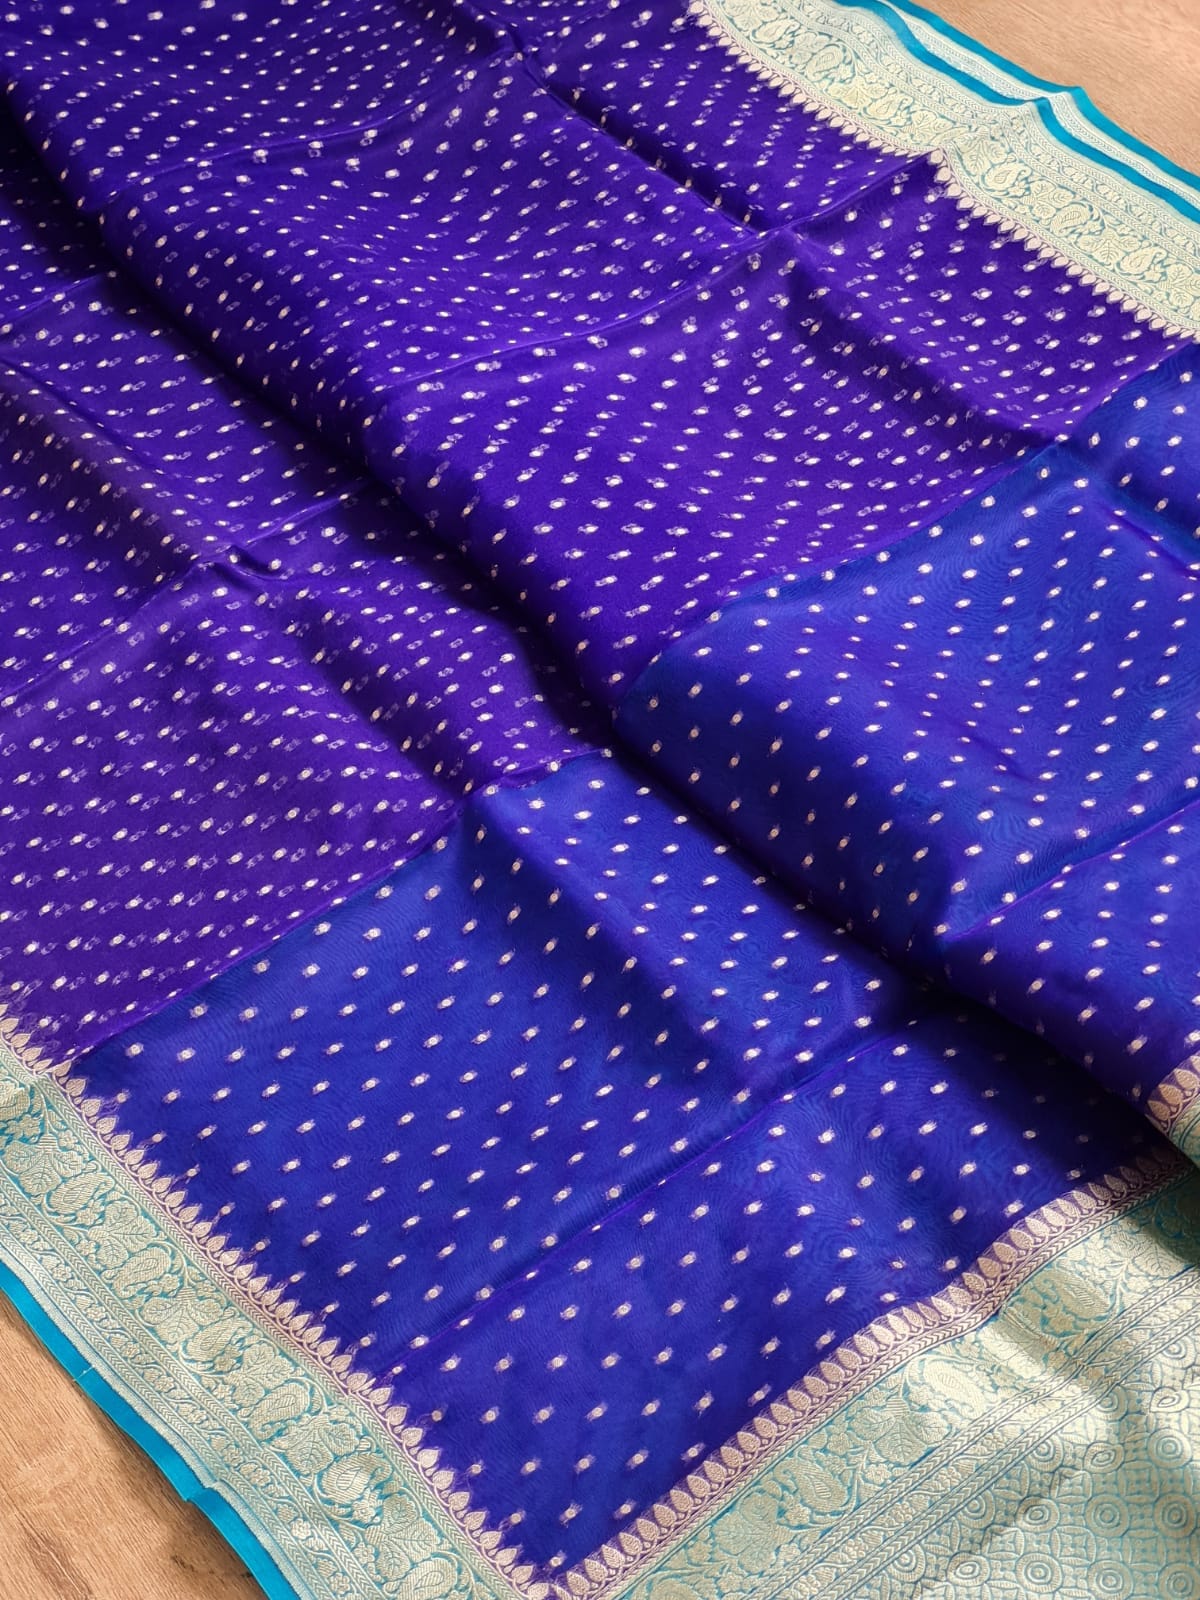 Handwoven Banarasi Pure Kora Silk Saree with contrast border Pallu and blouse with special tassels